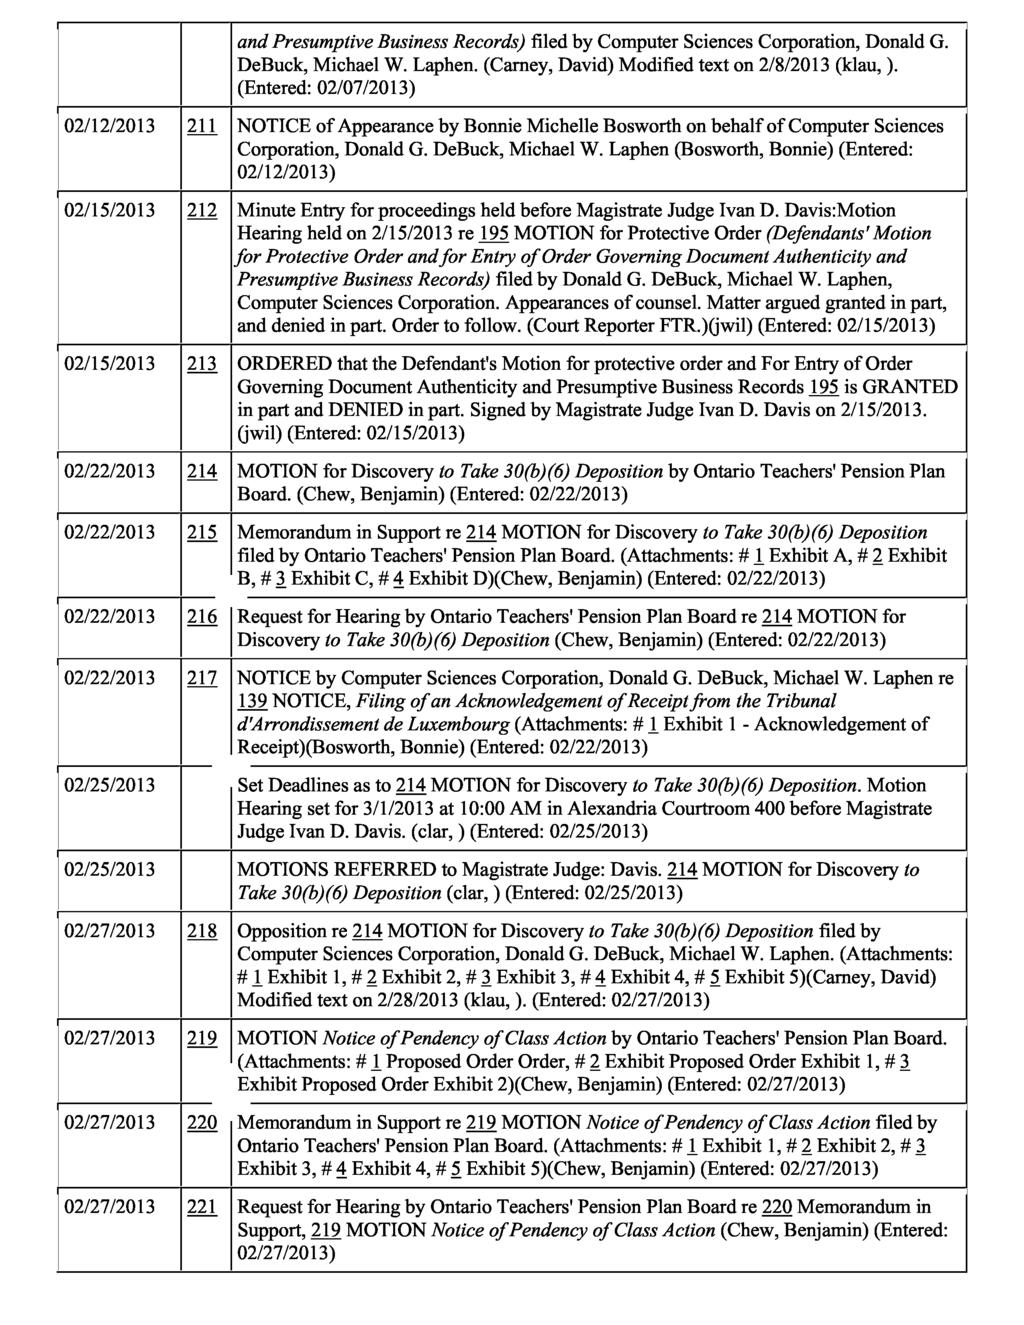 and Presumptive Business Records) filed by Computer Sciences Corporation, Donald G. DeBuck, Michael W. Laphen. (Carney, David) Modified text on 2/8/2013 (klau, ).